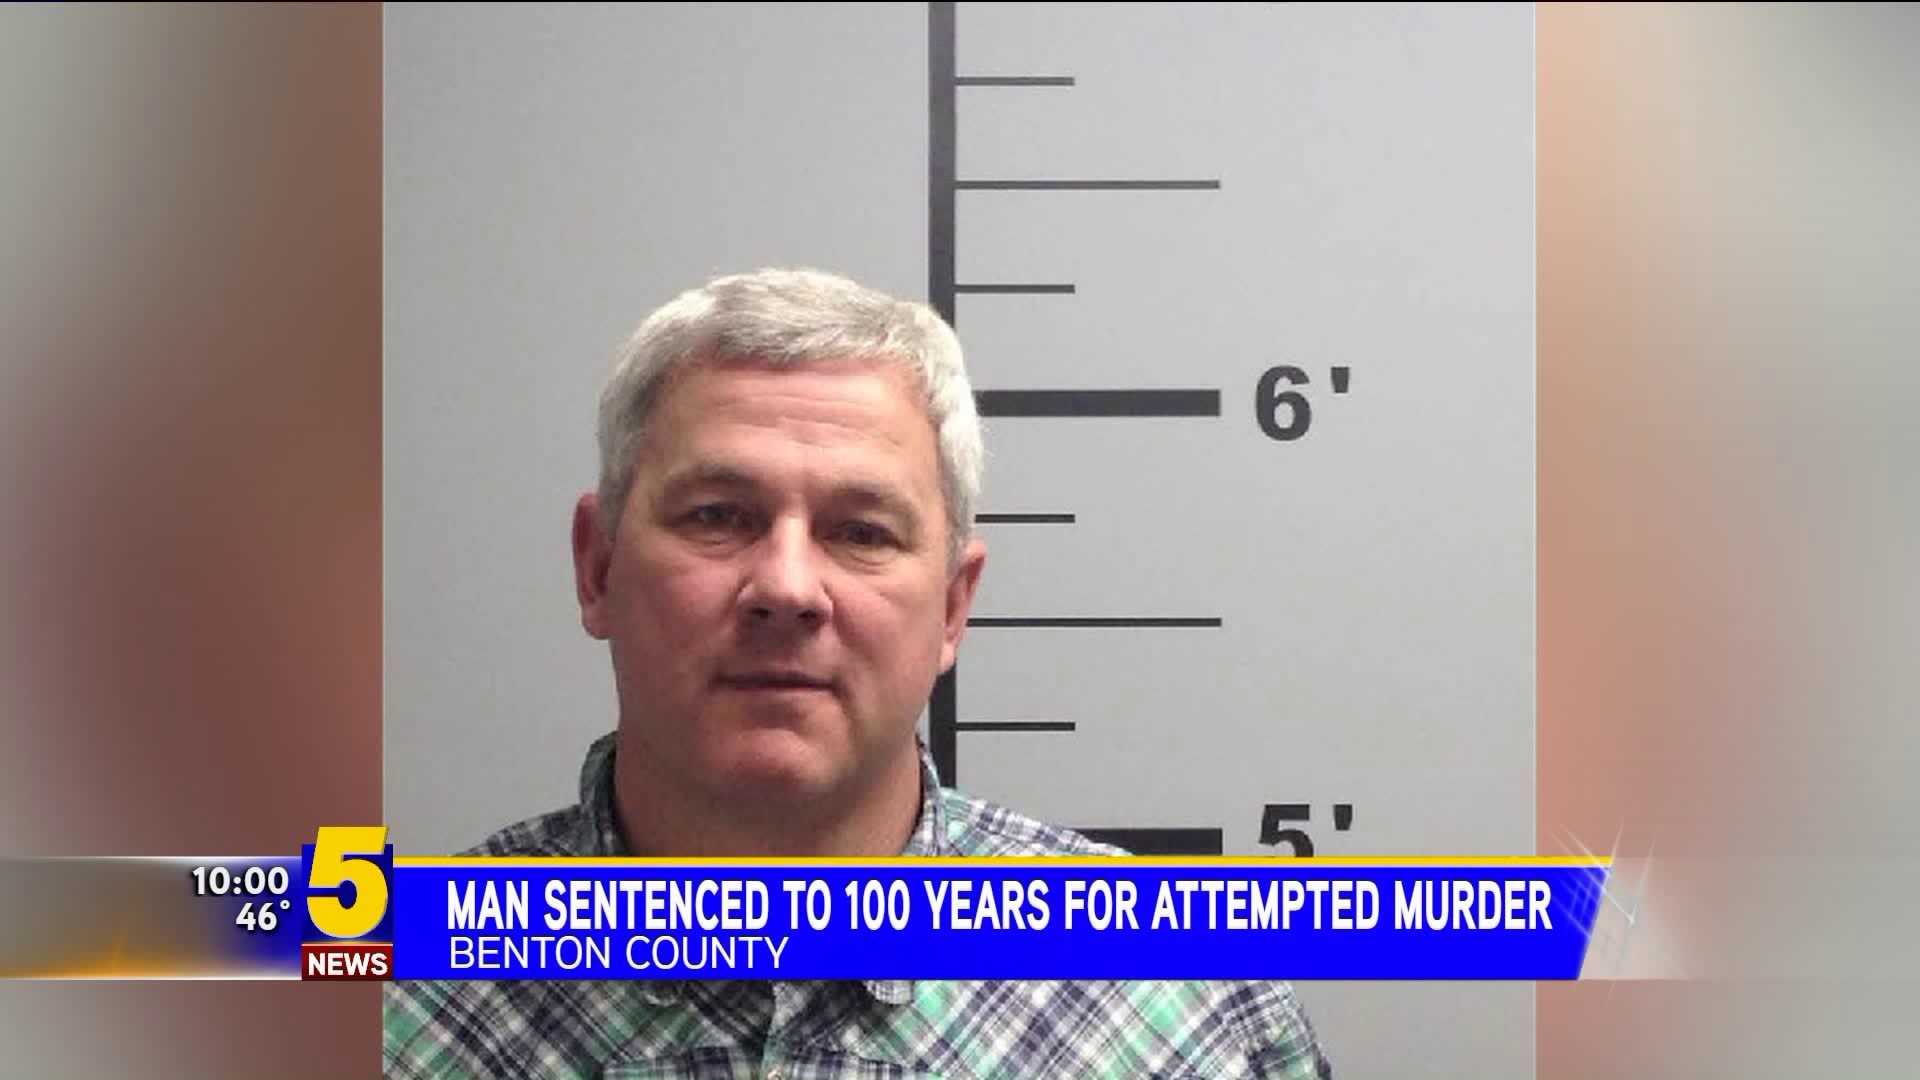 Man Sentenced To 100 Years For Attmepted Murder